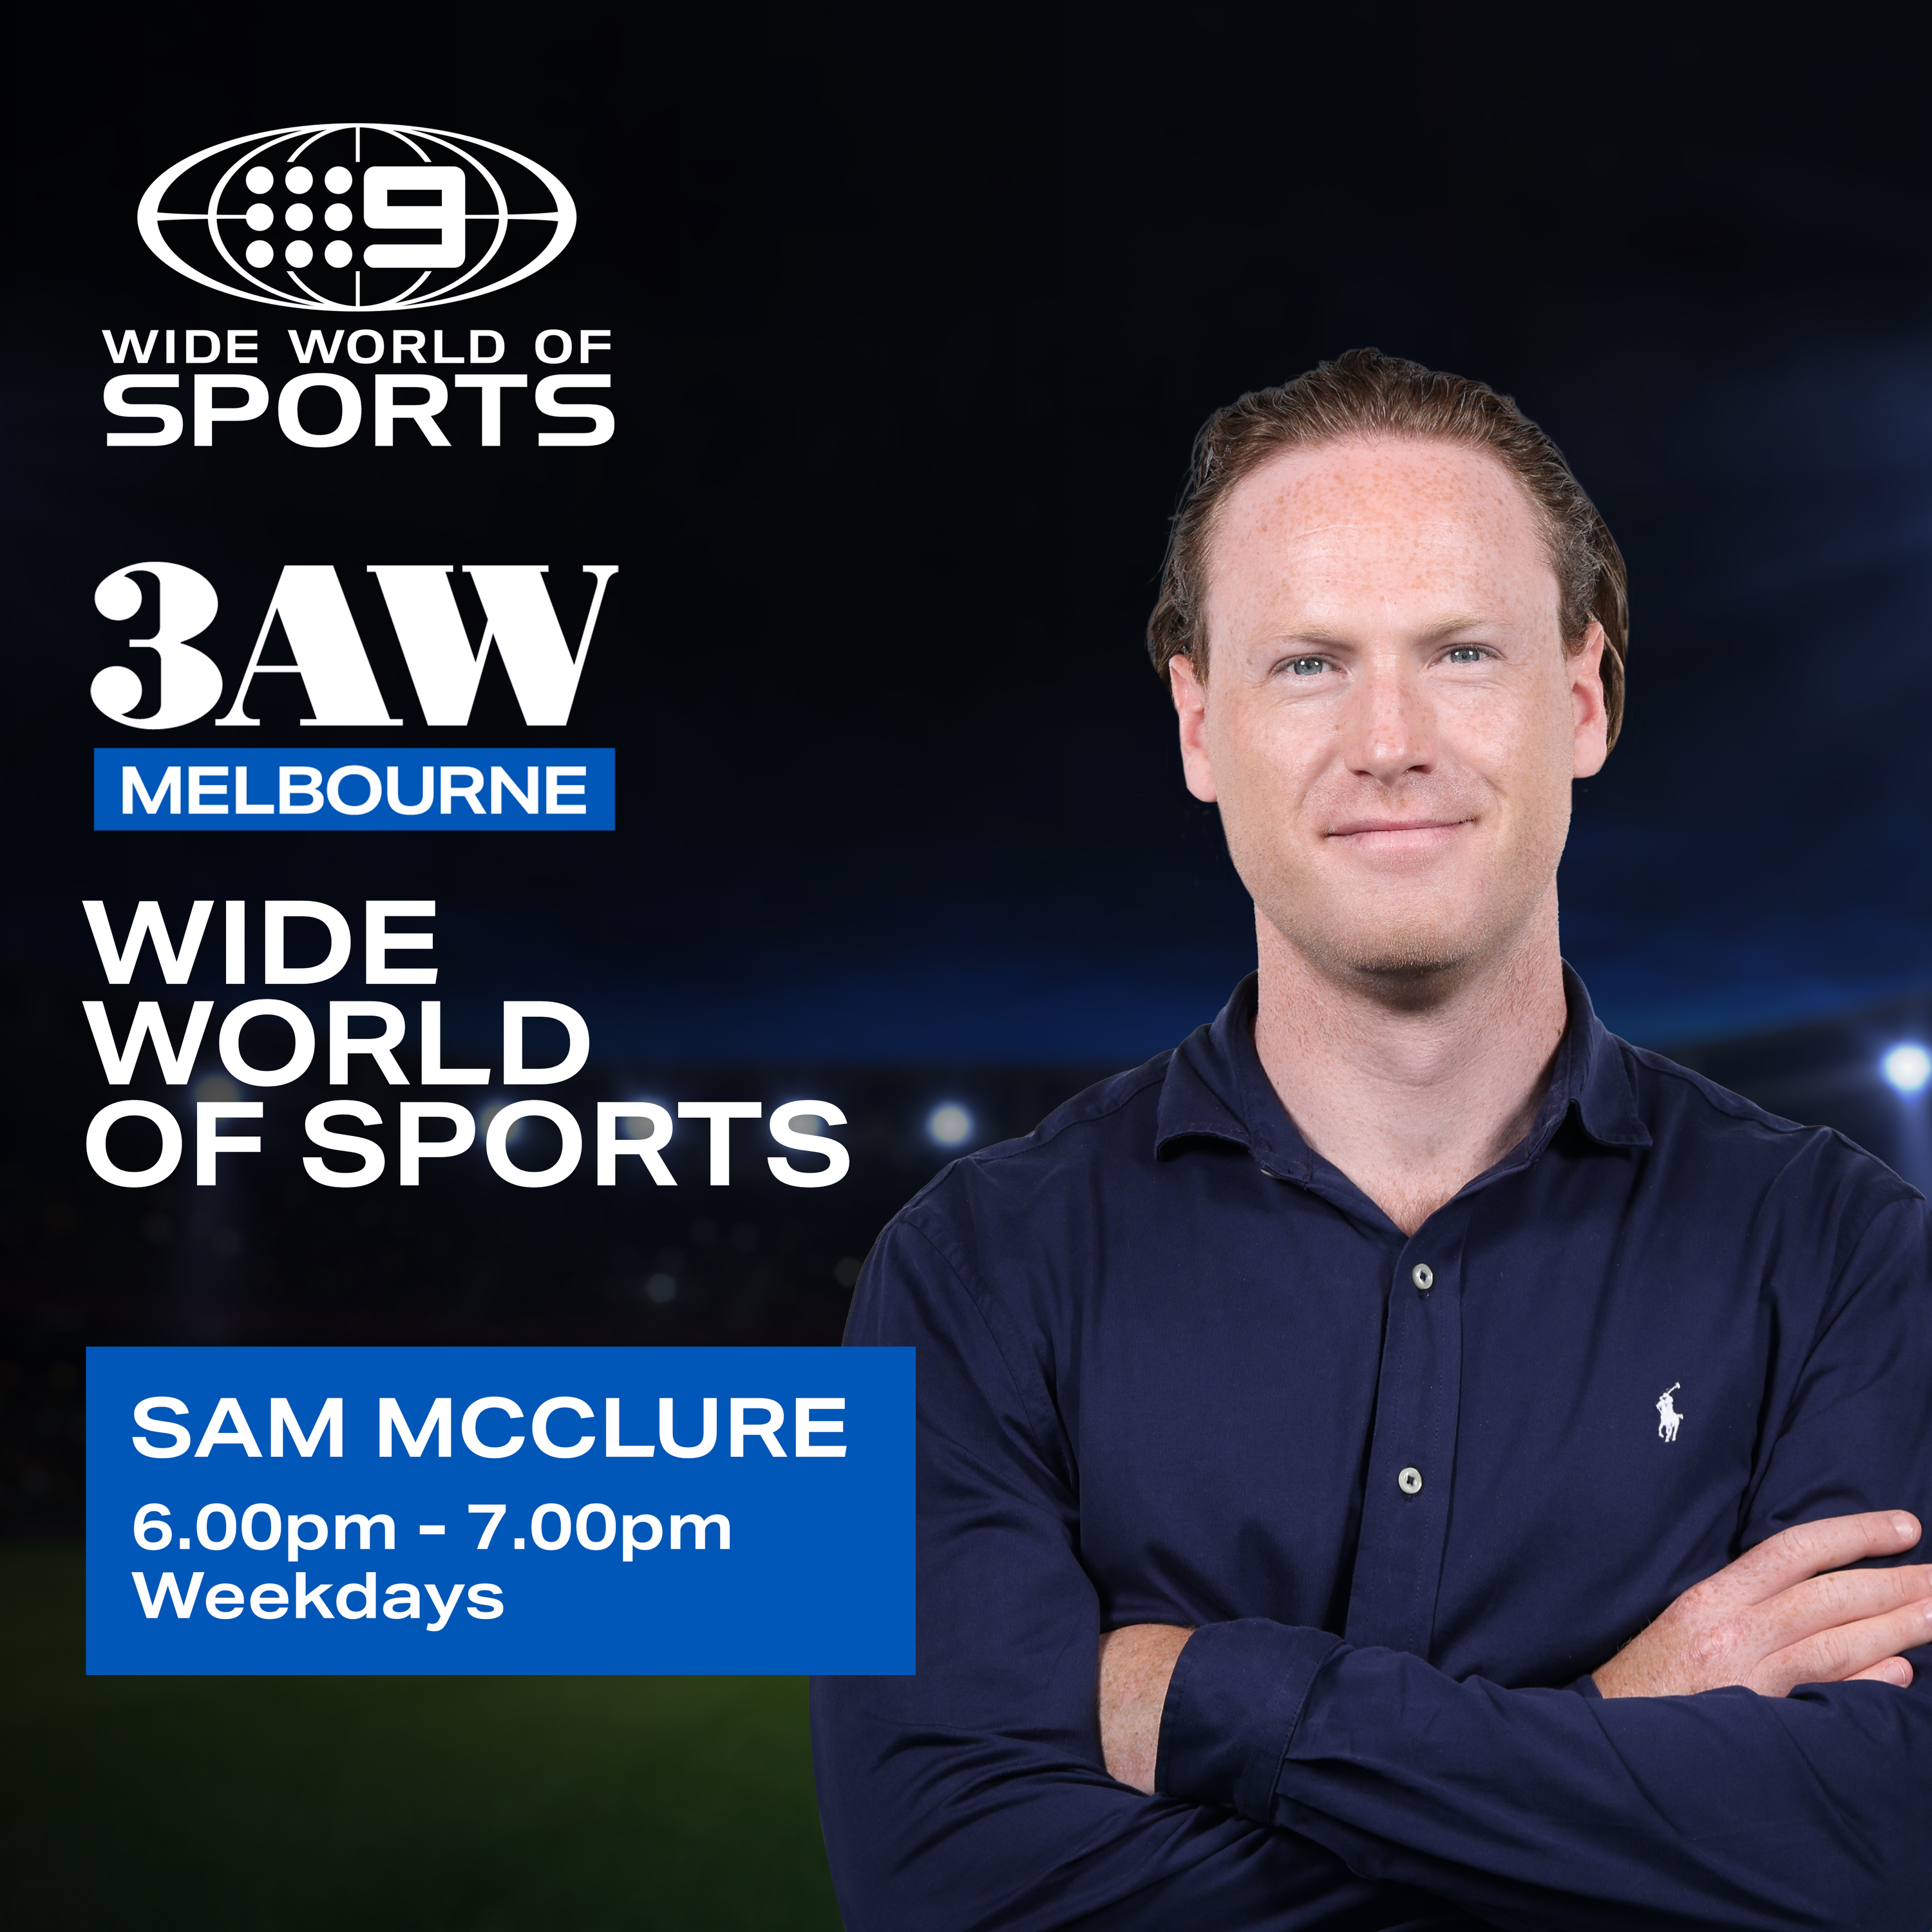 Aussie 49ers punter Mitch Wishnowsky joins 3AW LIVE from Las Vegas